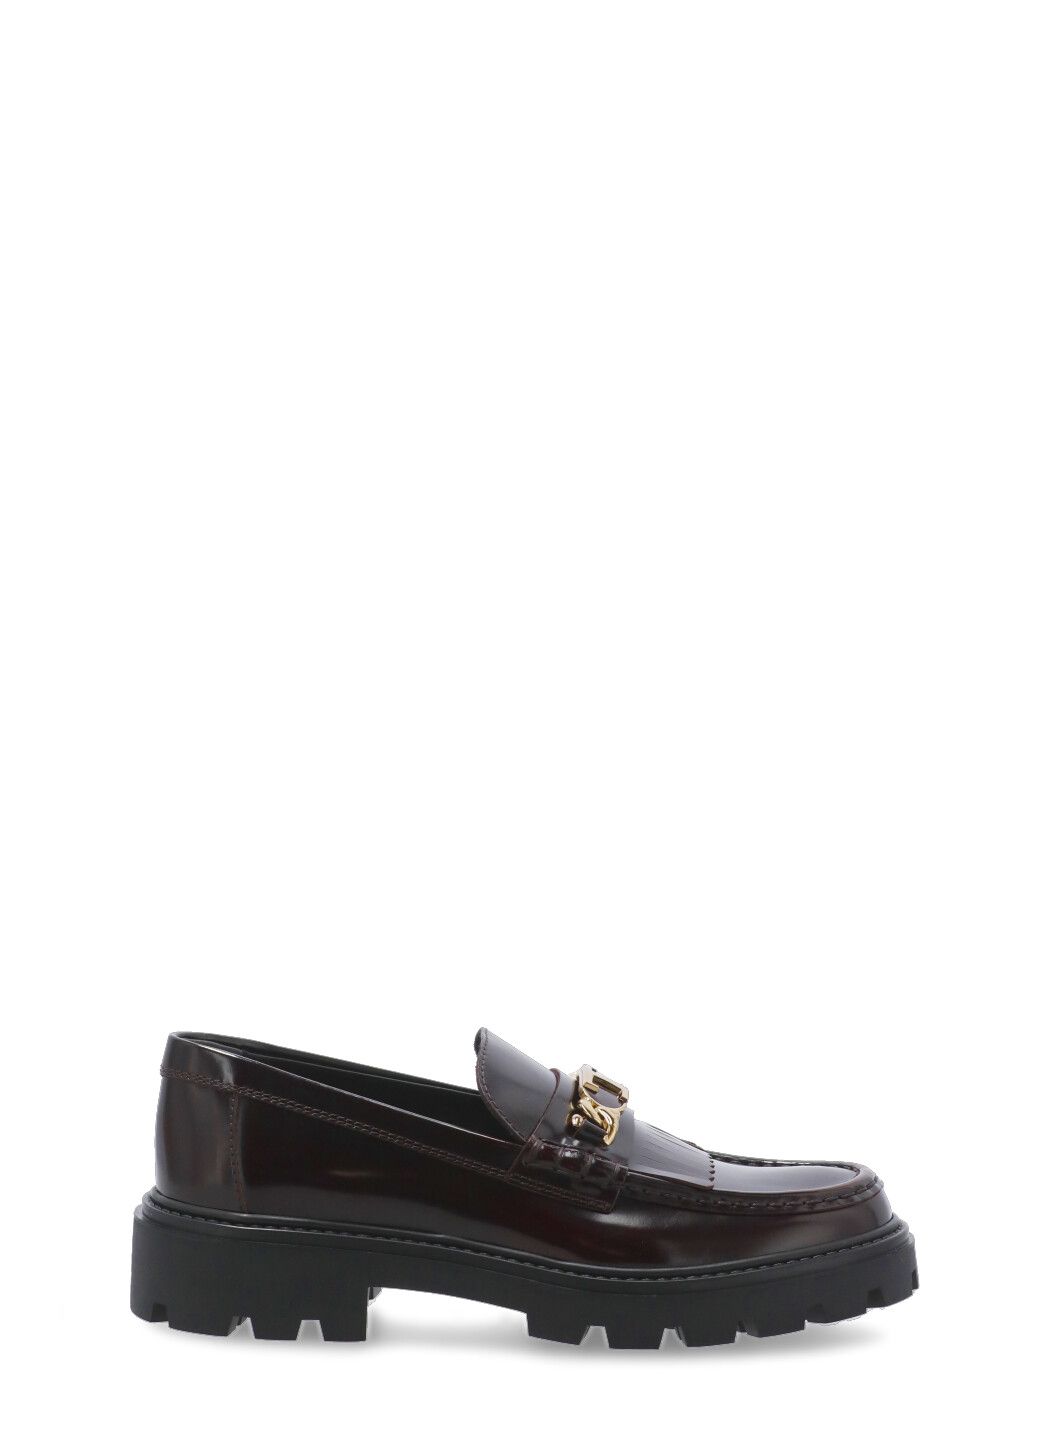 Fringed loafers